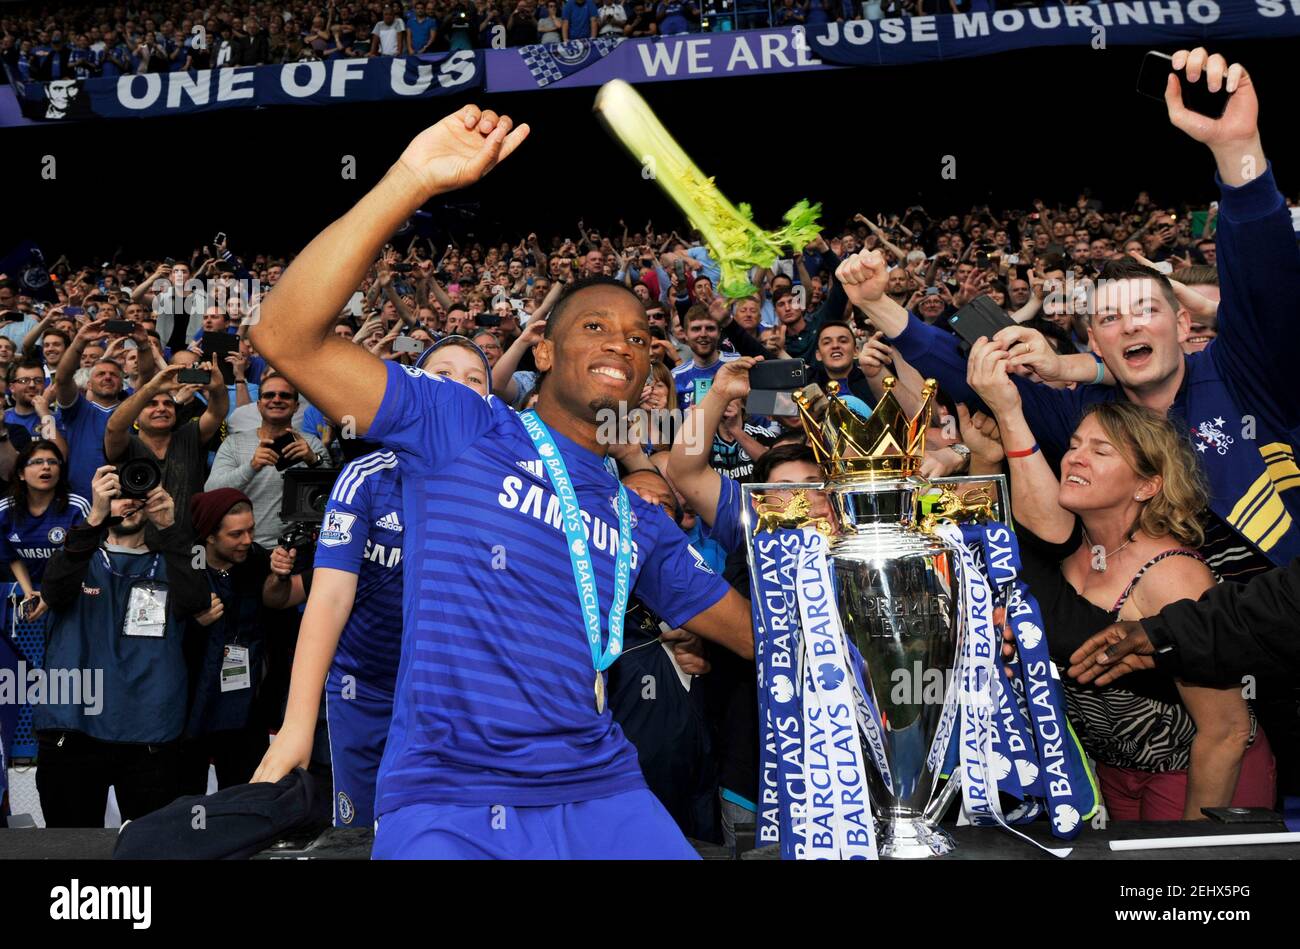 Football - Chelsea v Sunderland - Barclays Premier League - Stamford Bridge - 24/5/15 Chelsea's Didier Drogba celebrates with the trophy as celery is thrown after winning the Barclays Premier League Action Images via Reuters / Adam Holt Livepic EDITORIAL USE ONLY. No use with unauthorized audio, video, data, fixture lists, club/league logos or 'live' services. Online in-match use limited to 45 images, no video emulation. No use in betting, games or single club/league/player publications.  Please contact your account representative for further details. Stock Photo